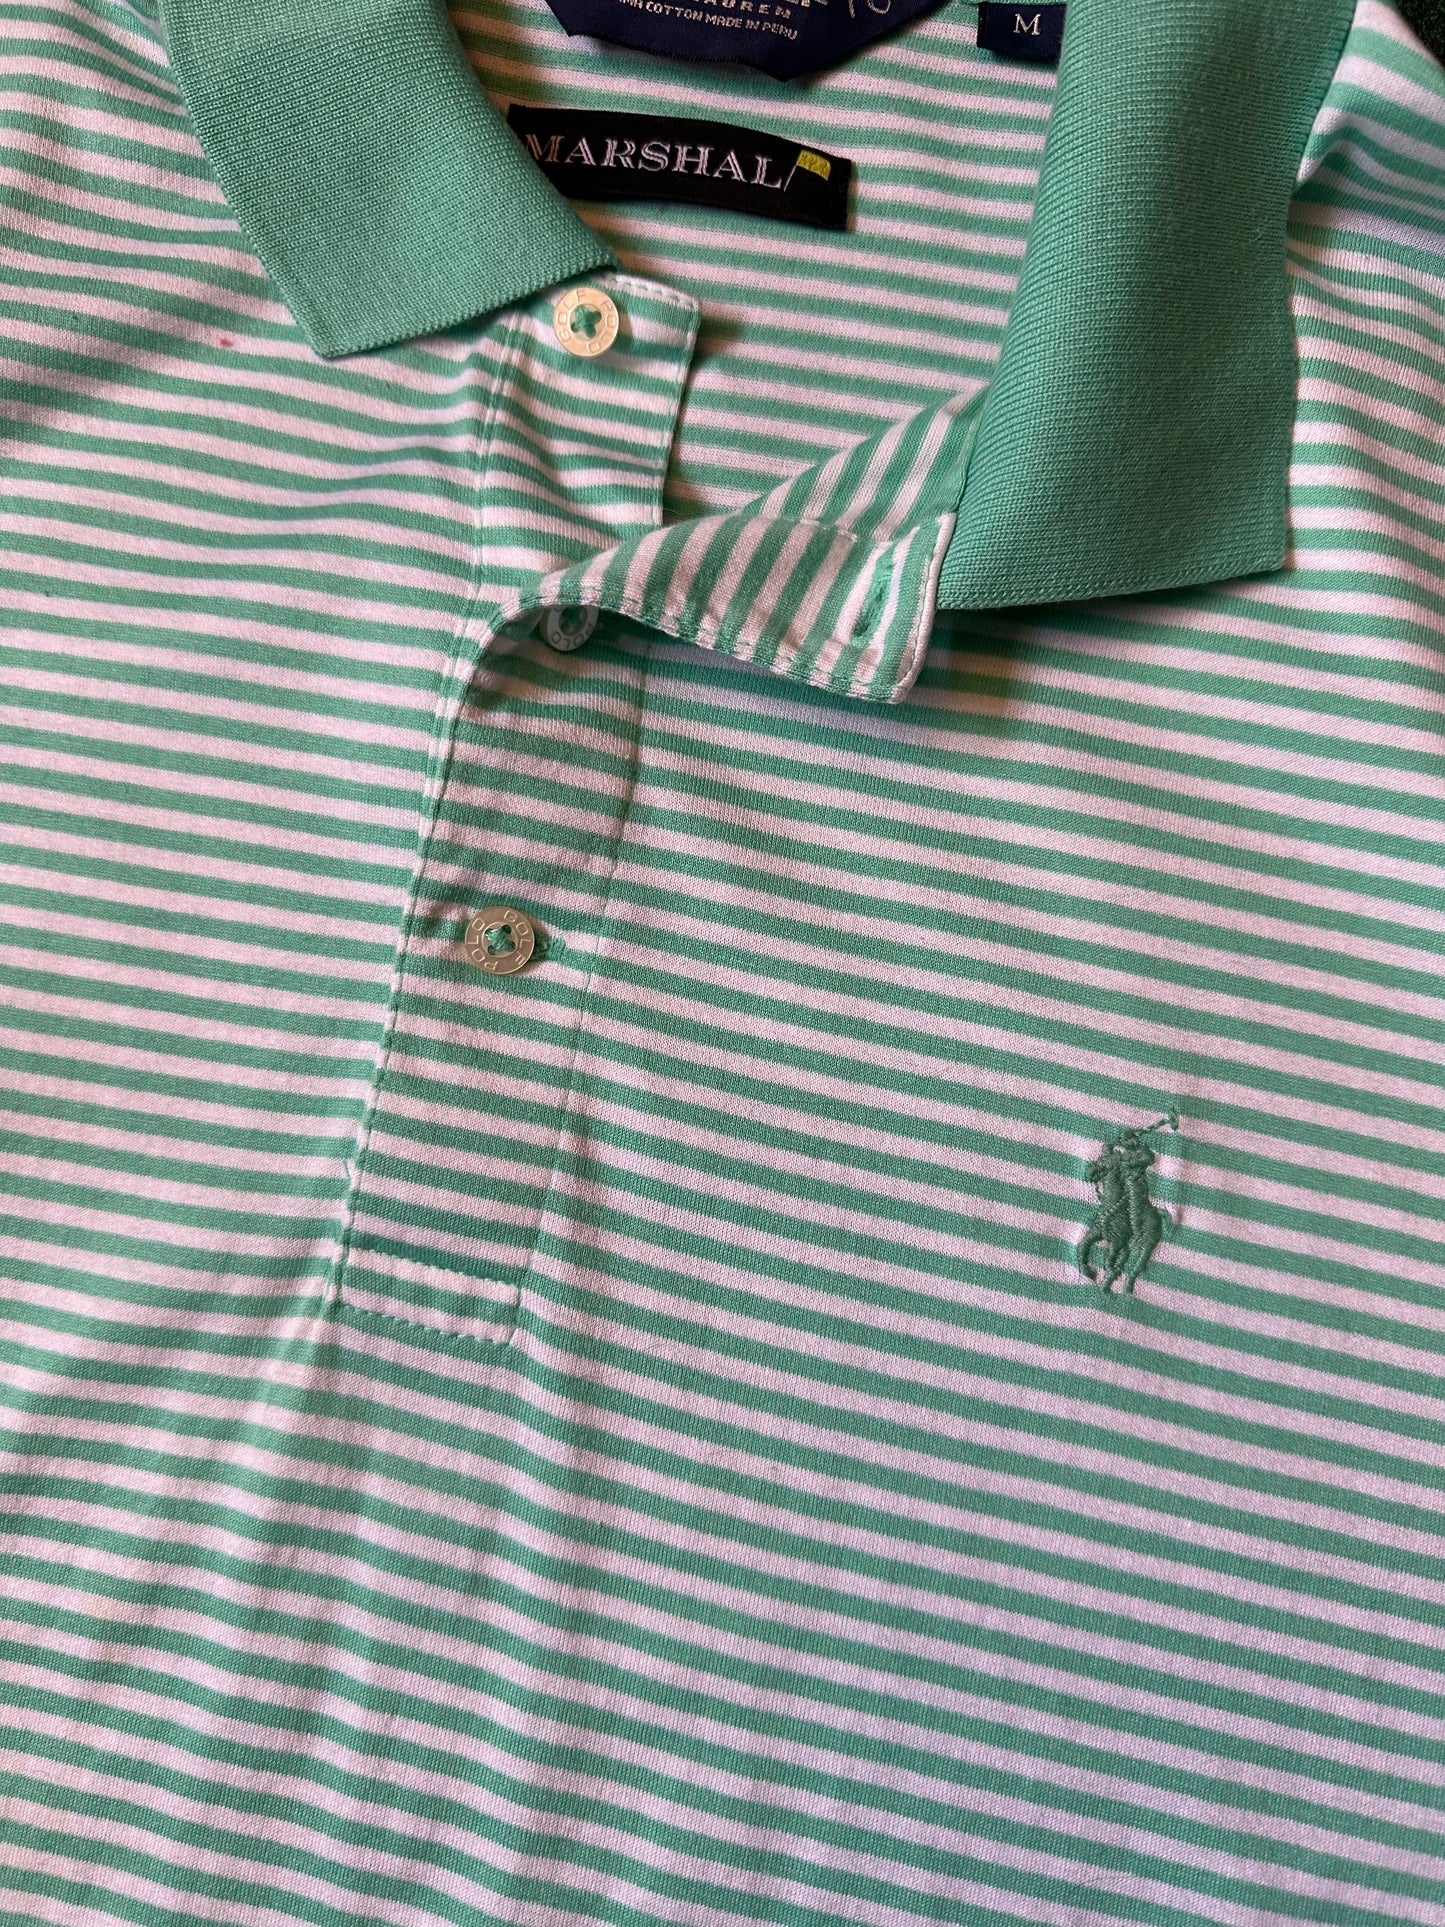 Marshal: “Reverse Sour Apple” Polo